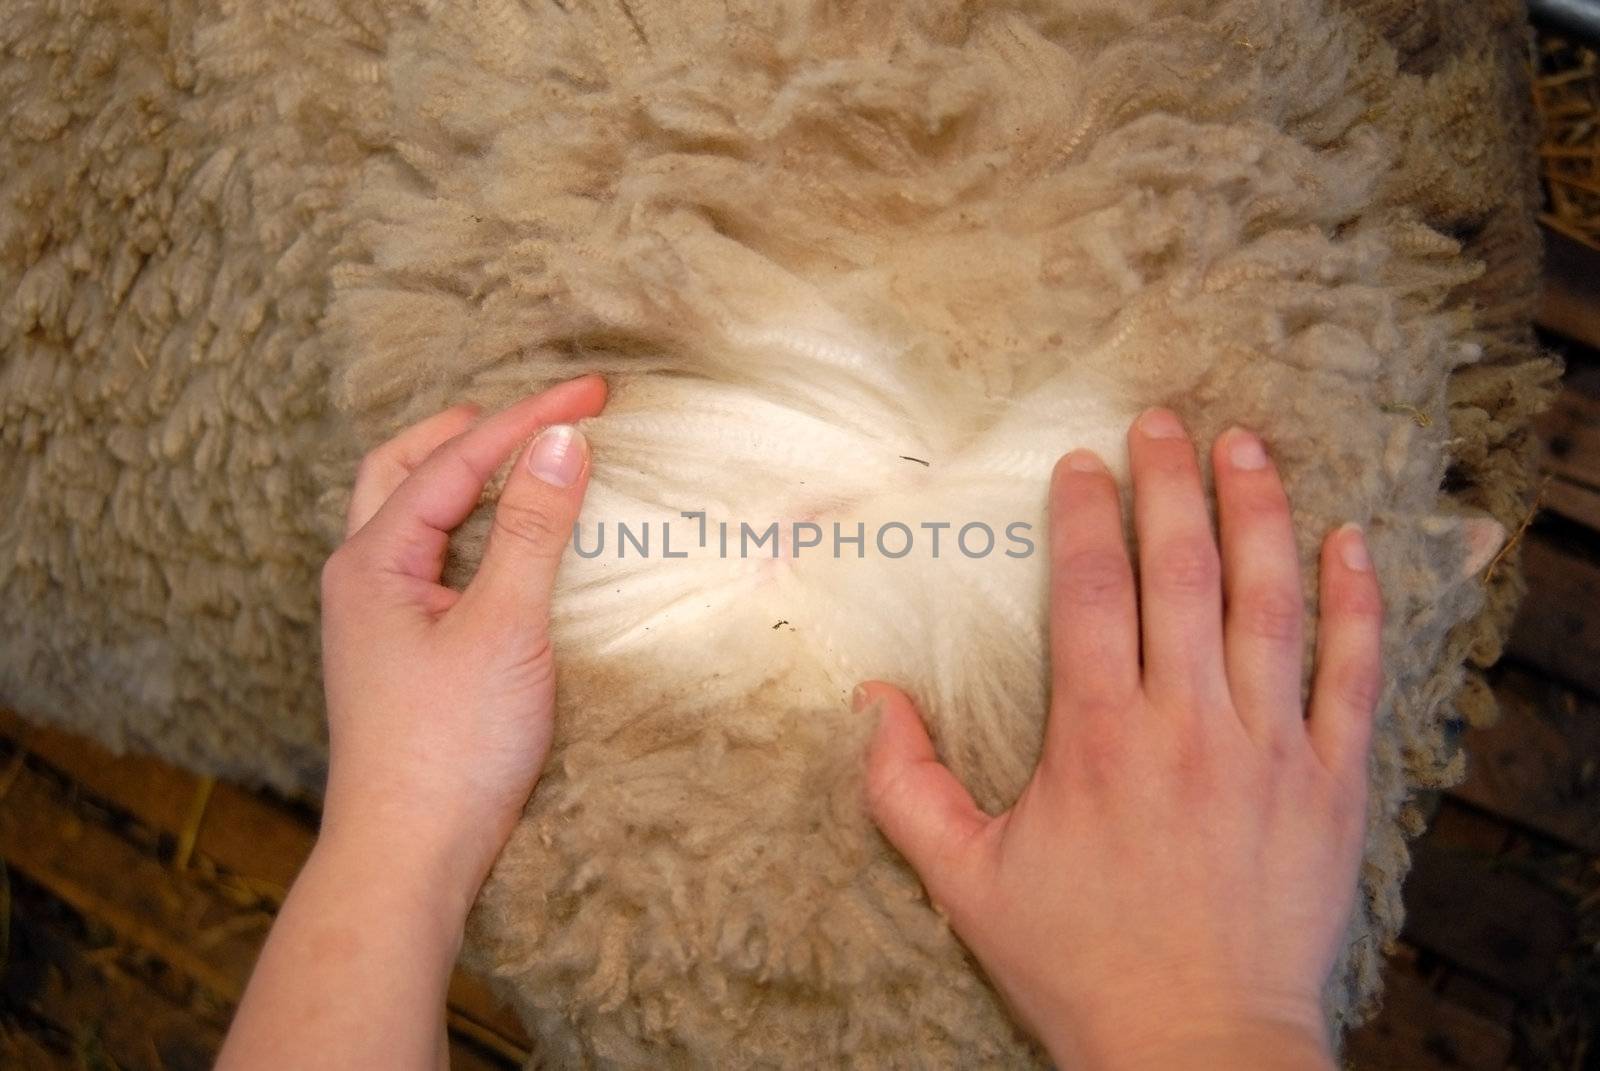 Sheepskin being separated by hands of a woman, showing how clean and white  the wool is